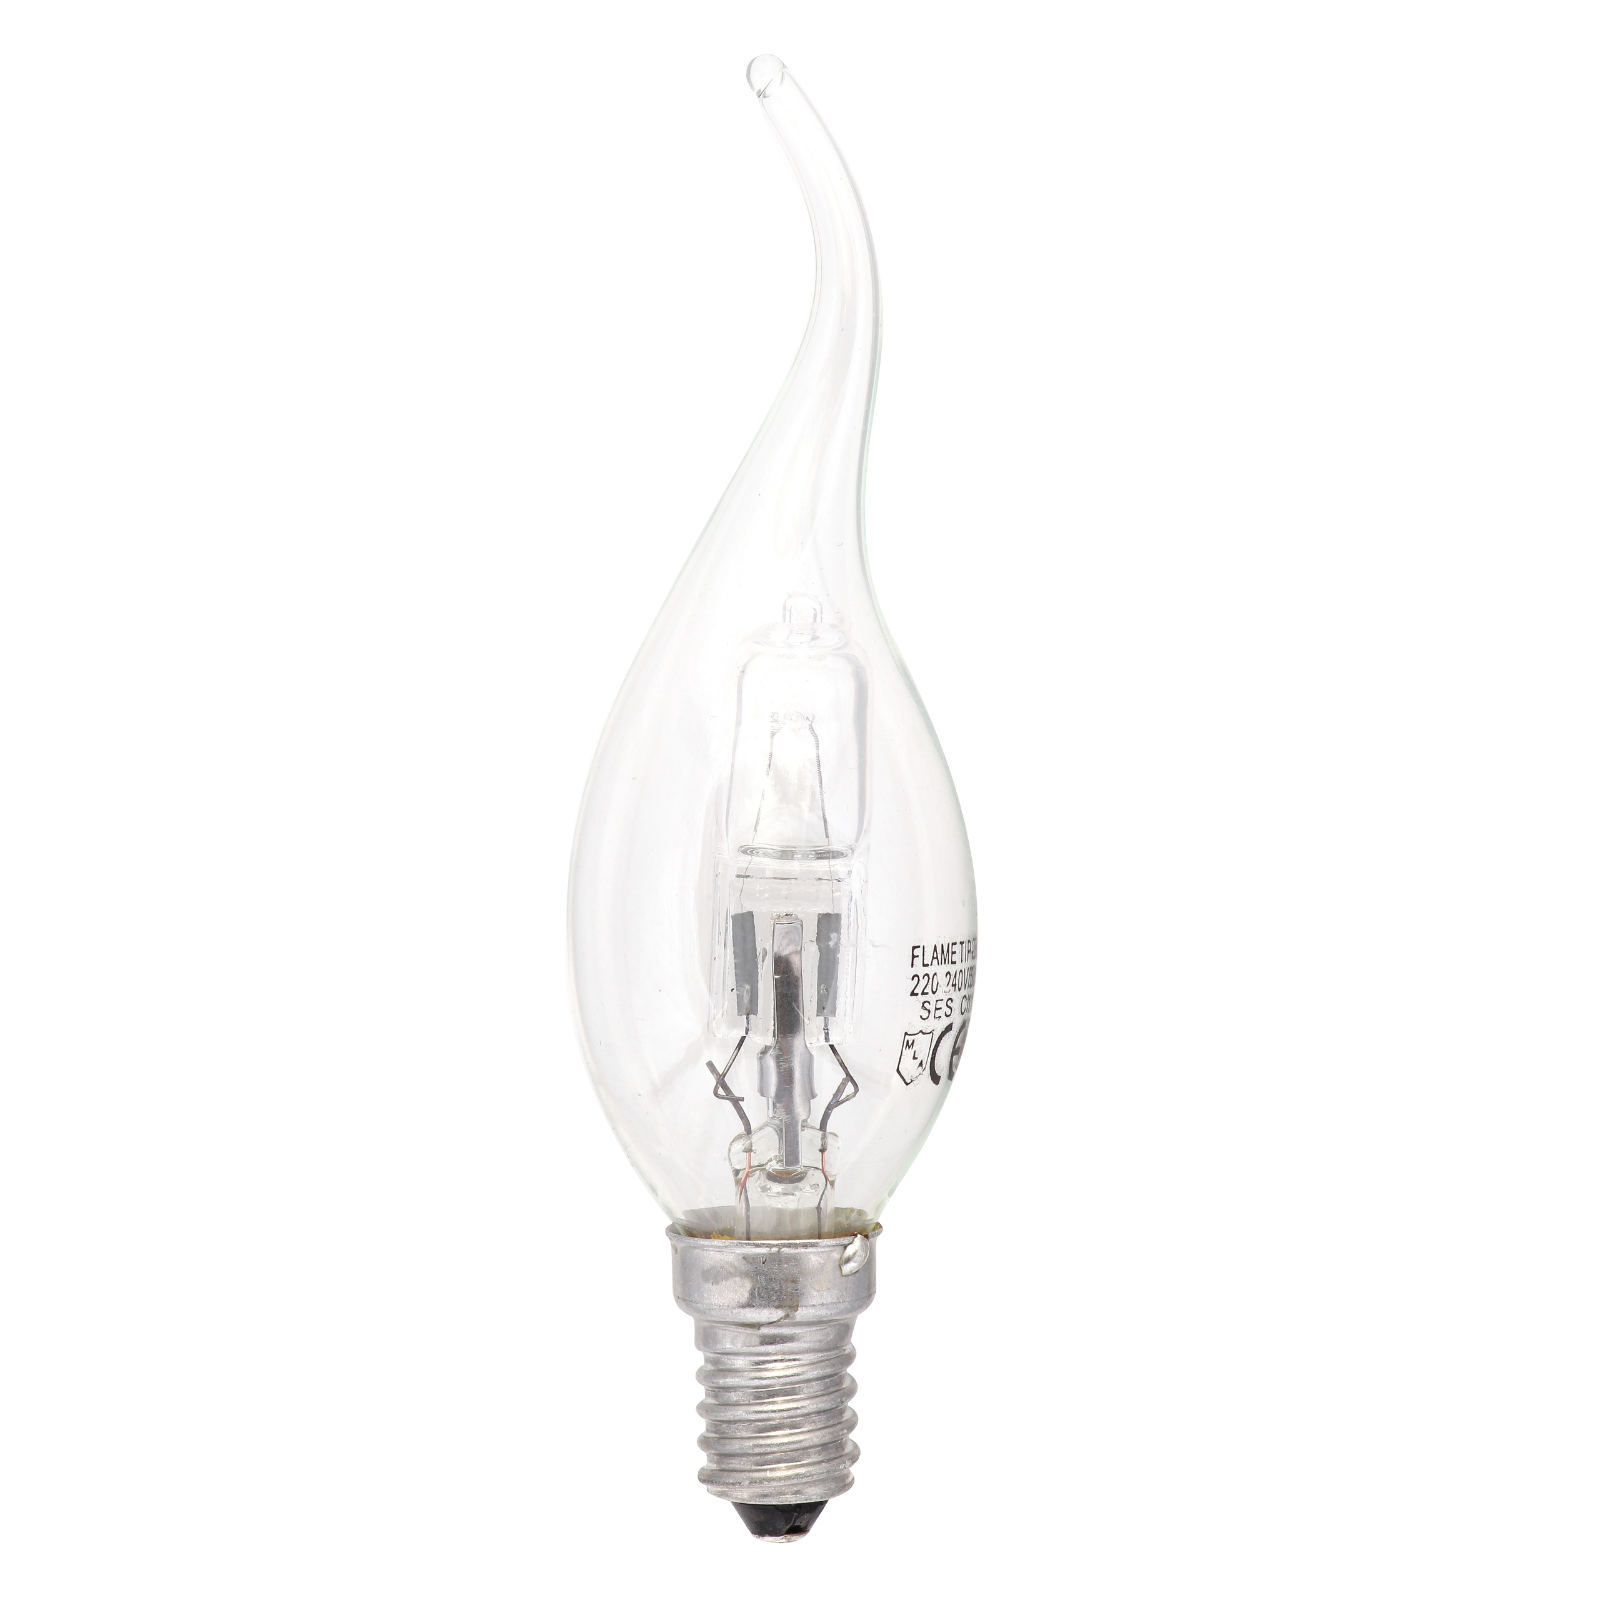 42W Halogen Energy Saving Clear Flame Tipped Lamp SES (equivalent To 60W) - HALO-F42SES - SOLD-OUT!! 